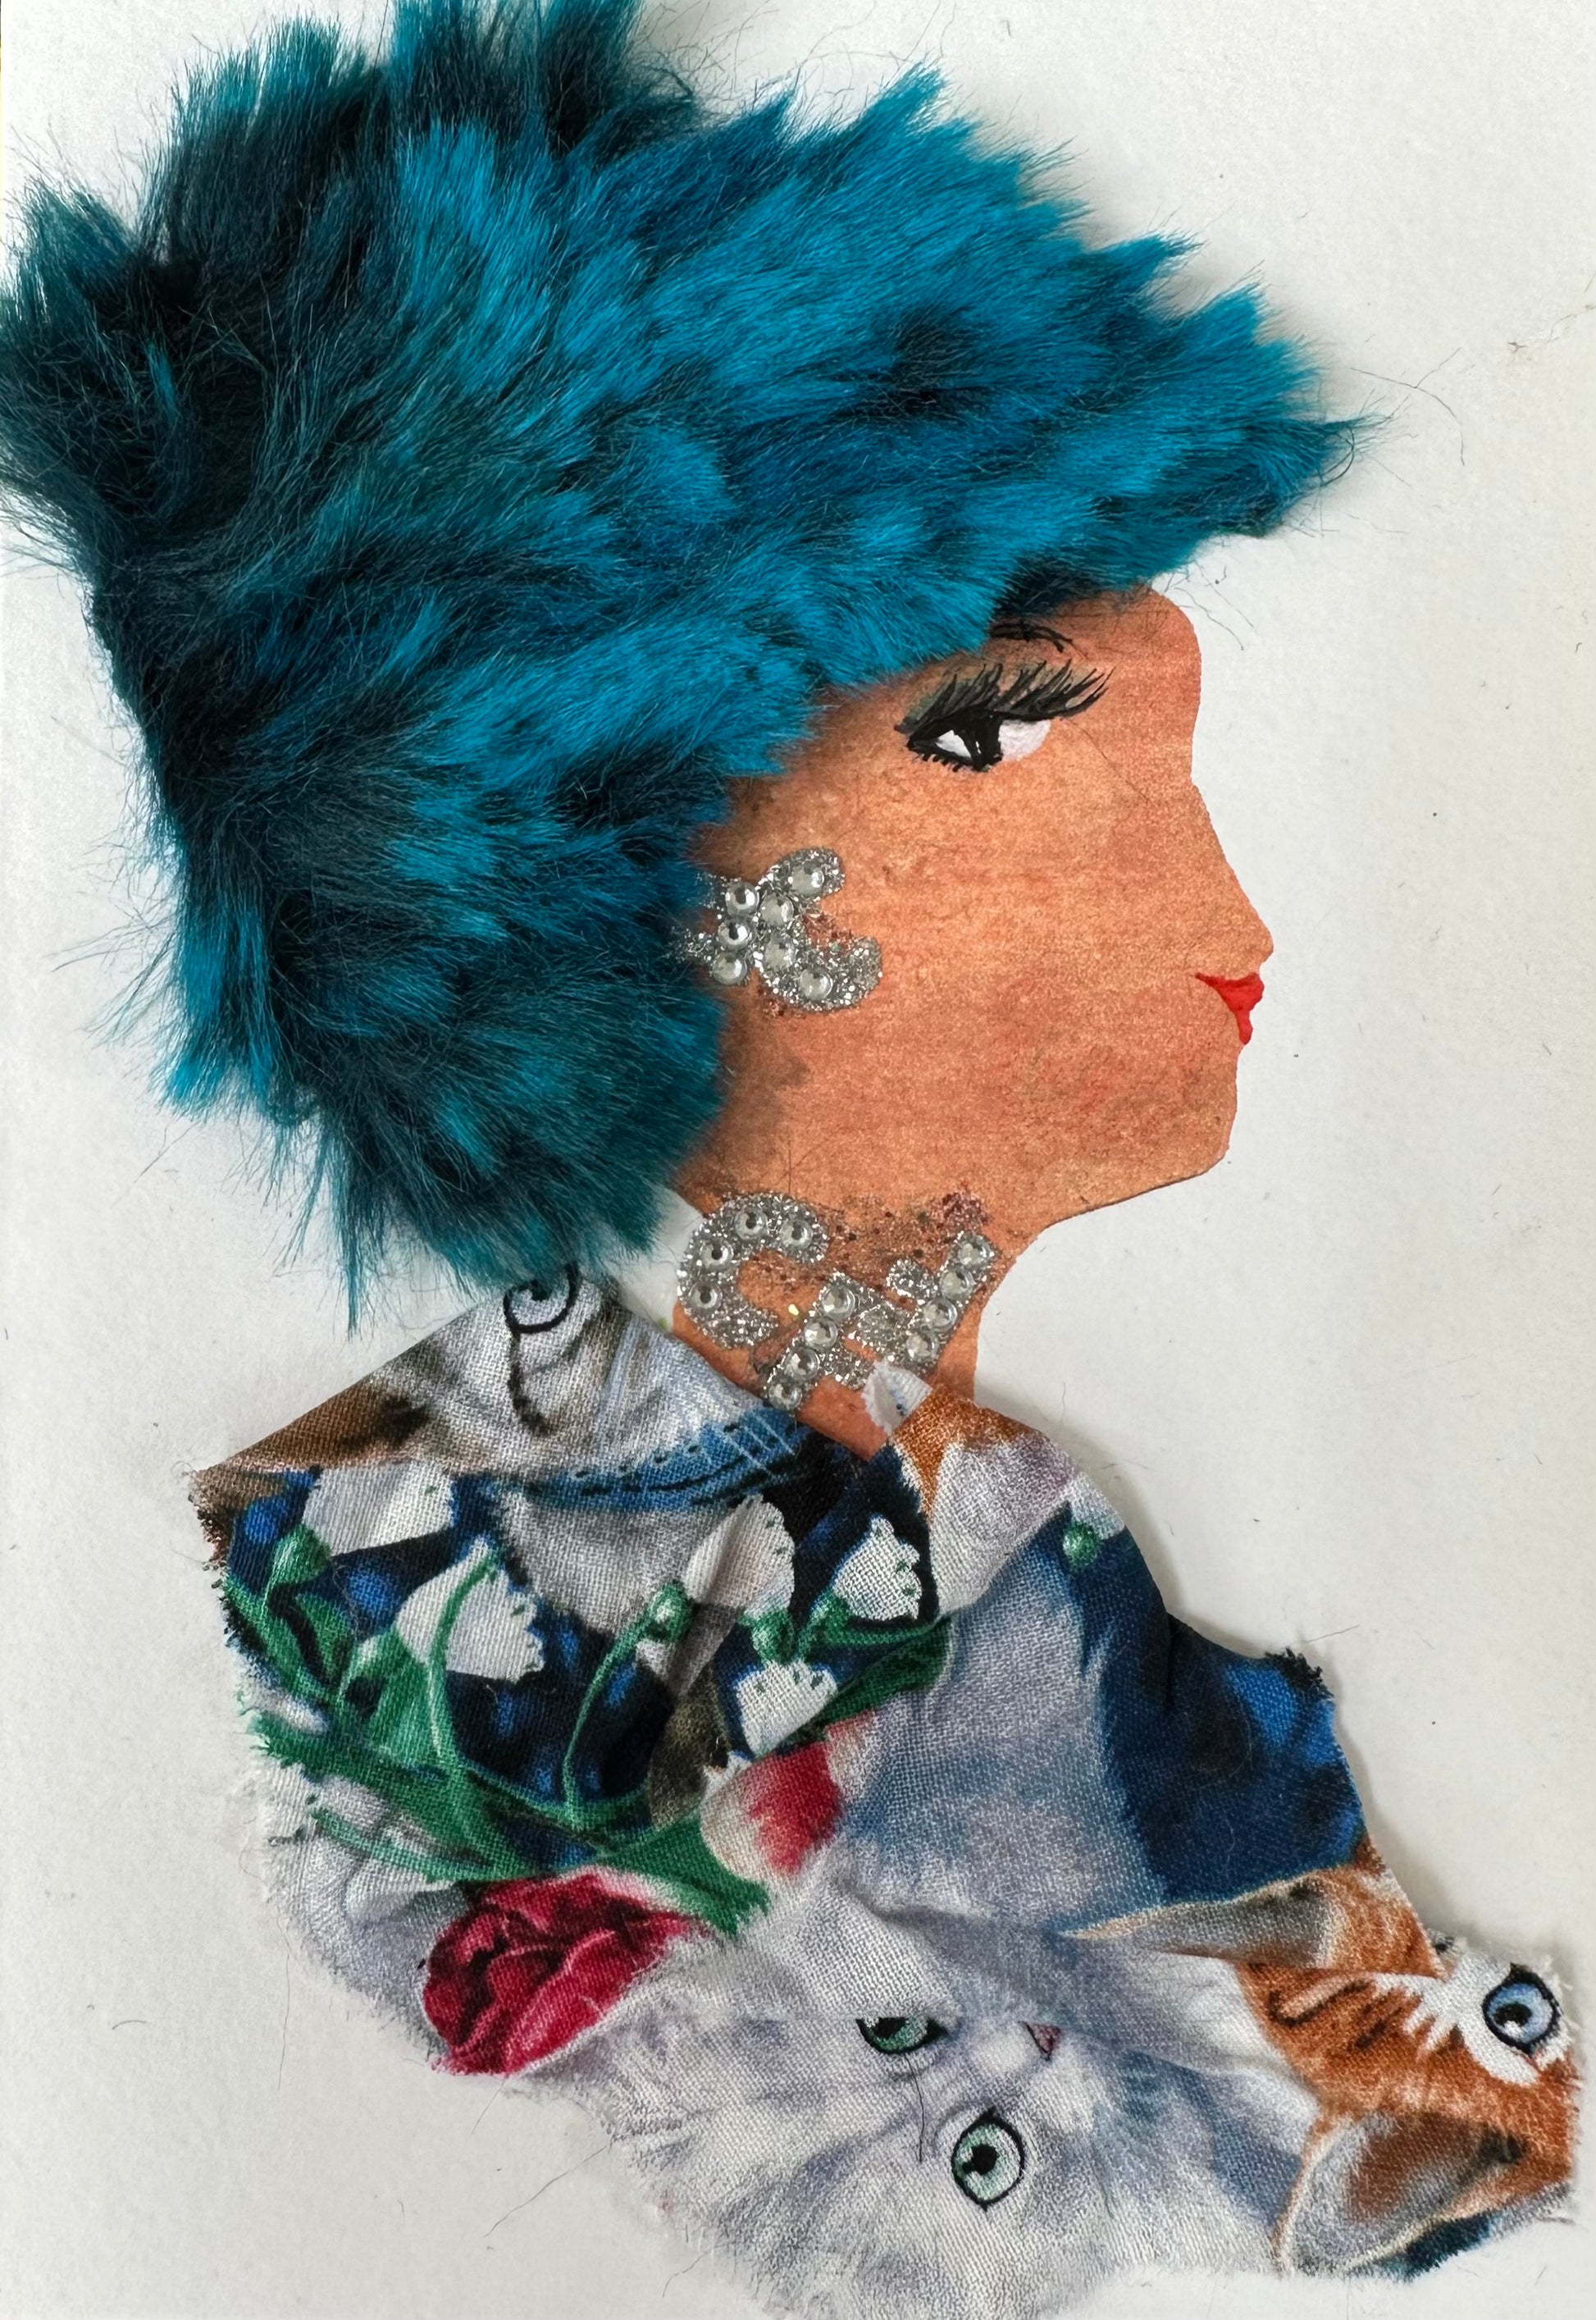 This is handmade card I created of a woman wearing a dark blue, cat print blouse. She has electric blue hair and silver gemstone jewellery